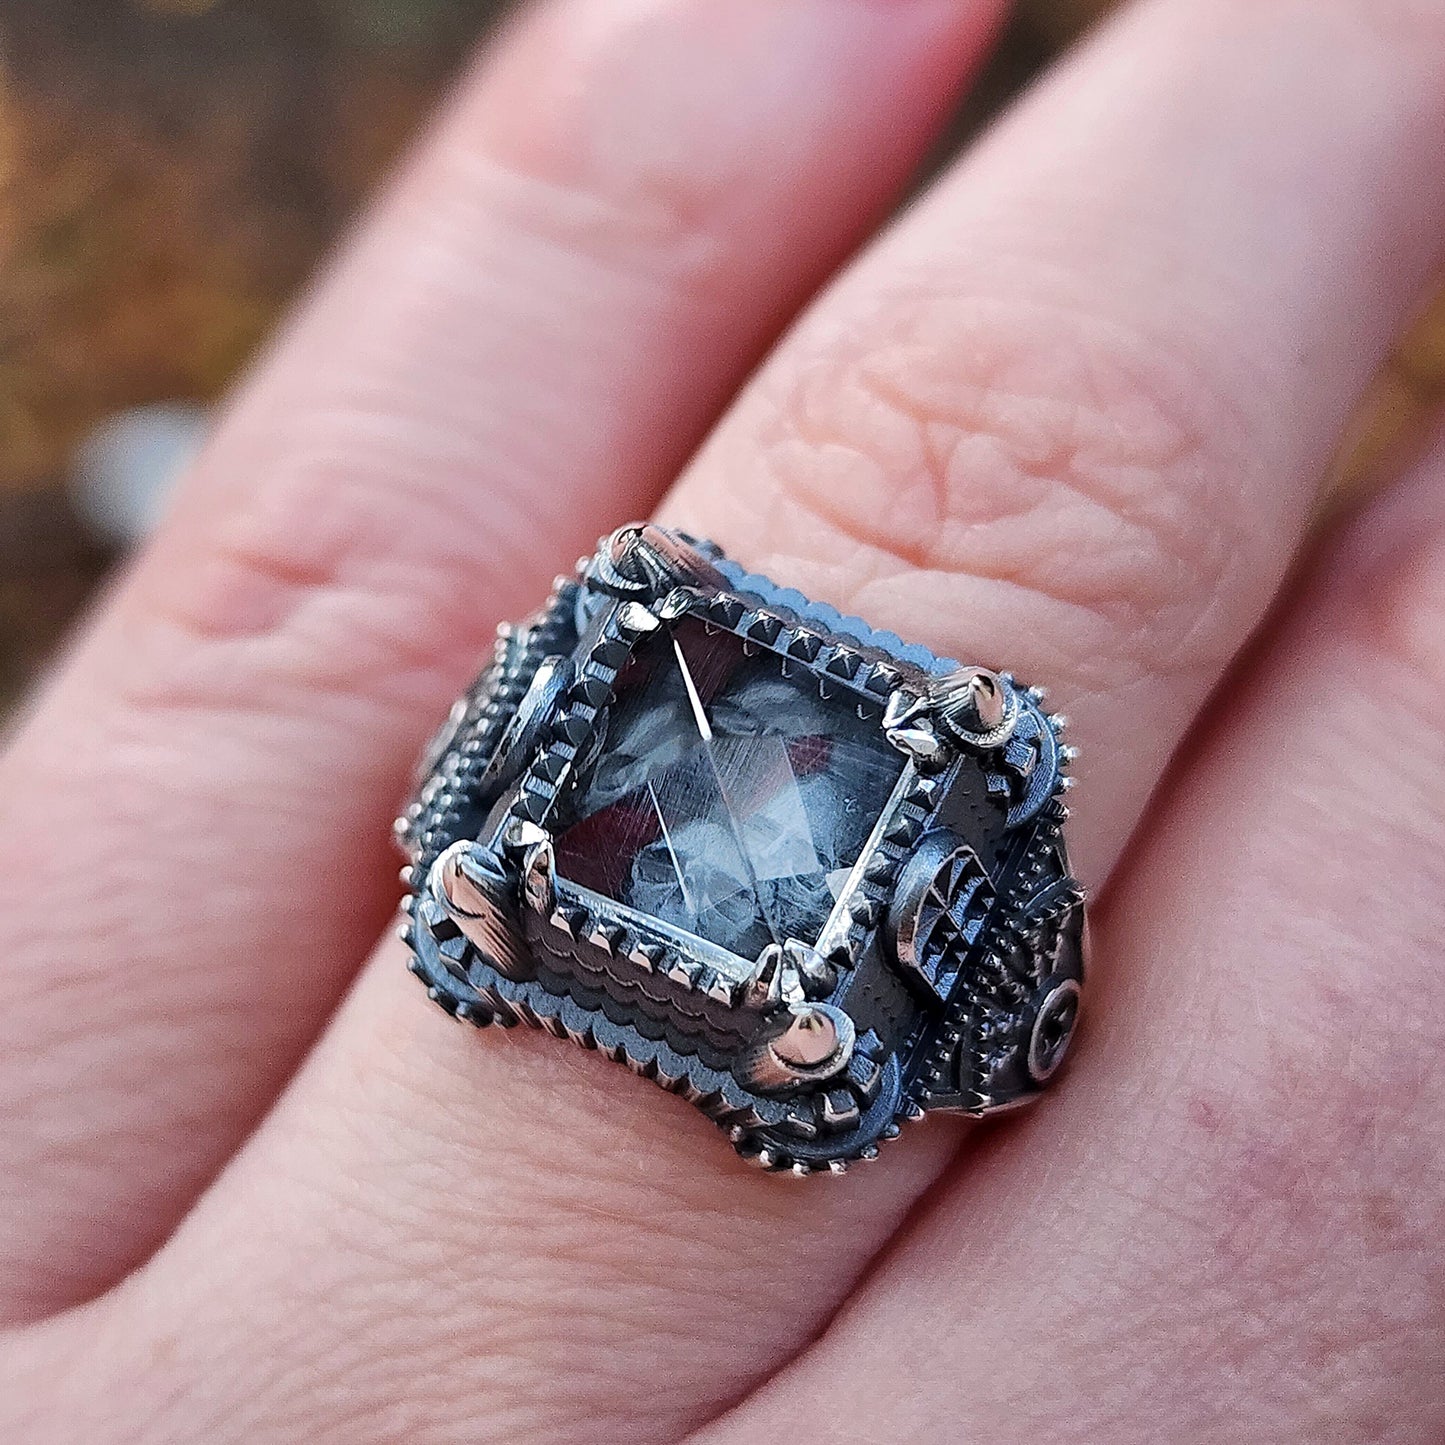 Haunted Tower Ring with Skull Pyramid Quartz Spooky Halloween Jewelry - Drawlloween Sterling Silver